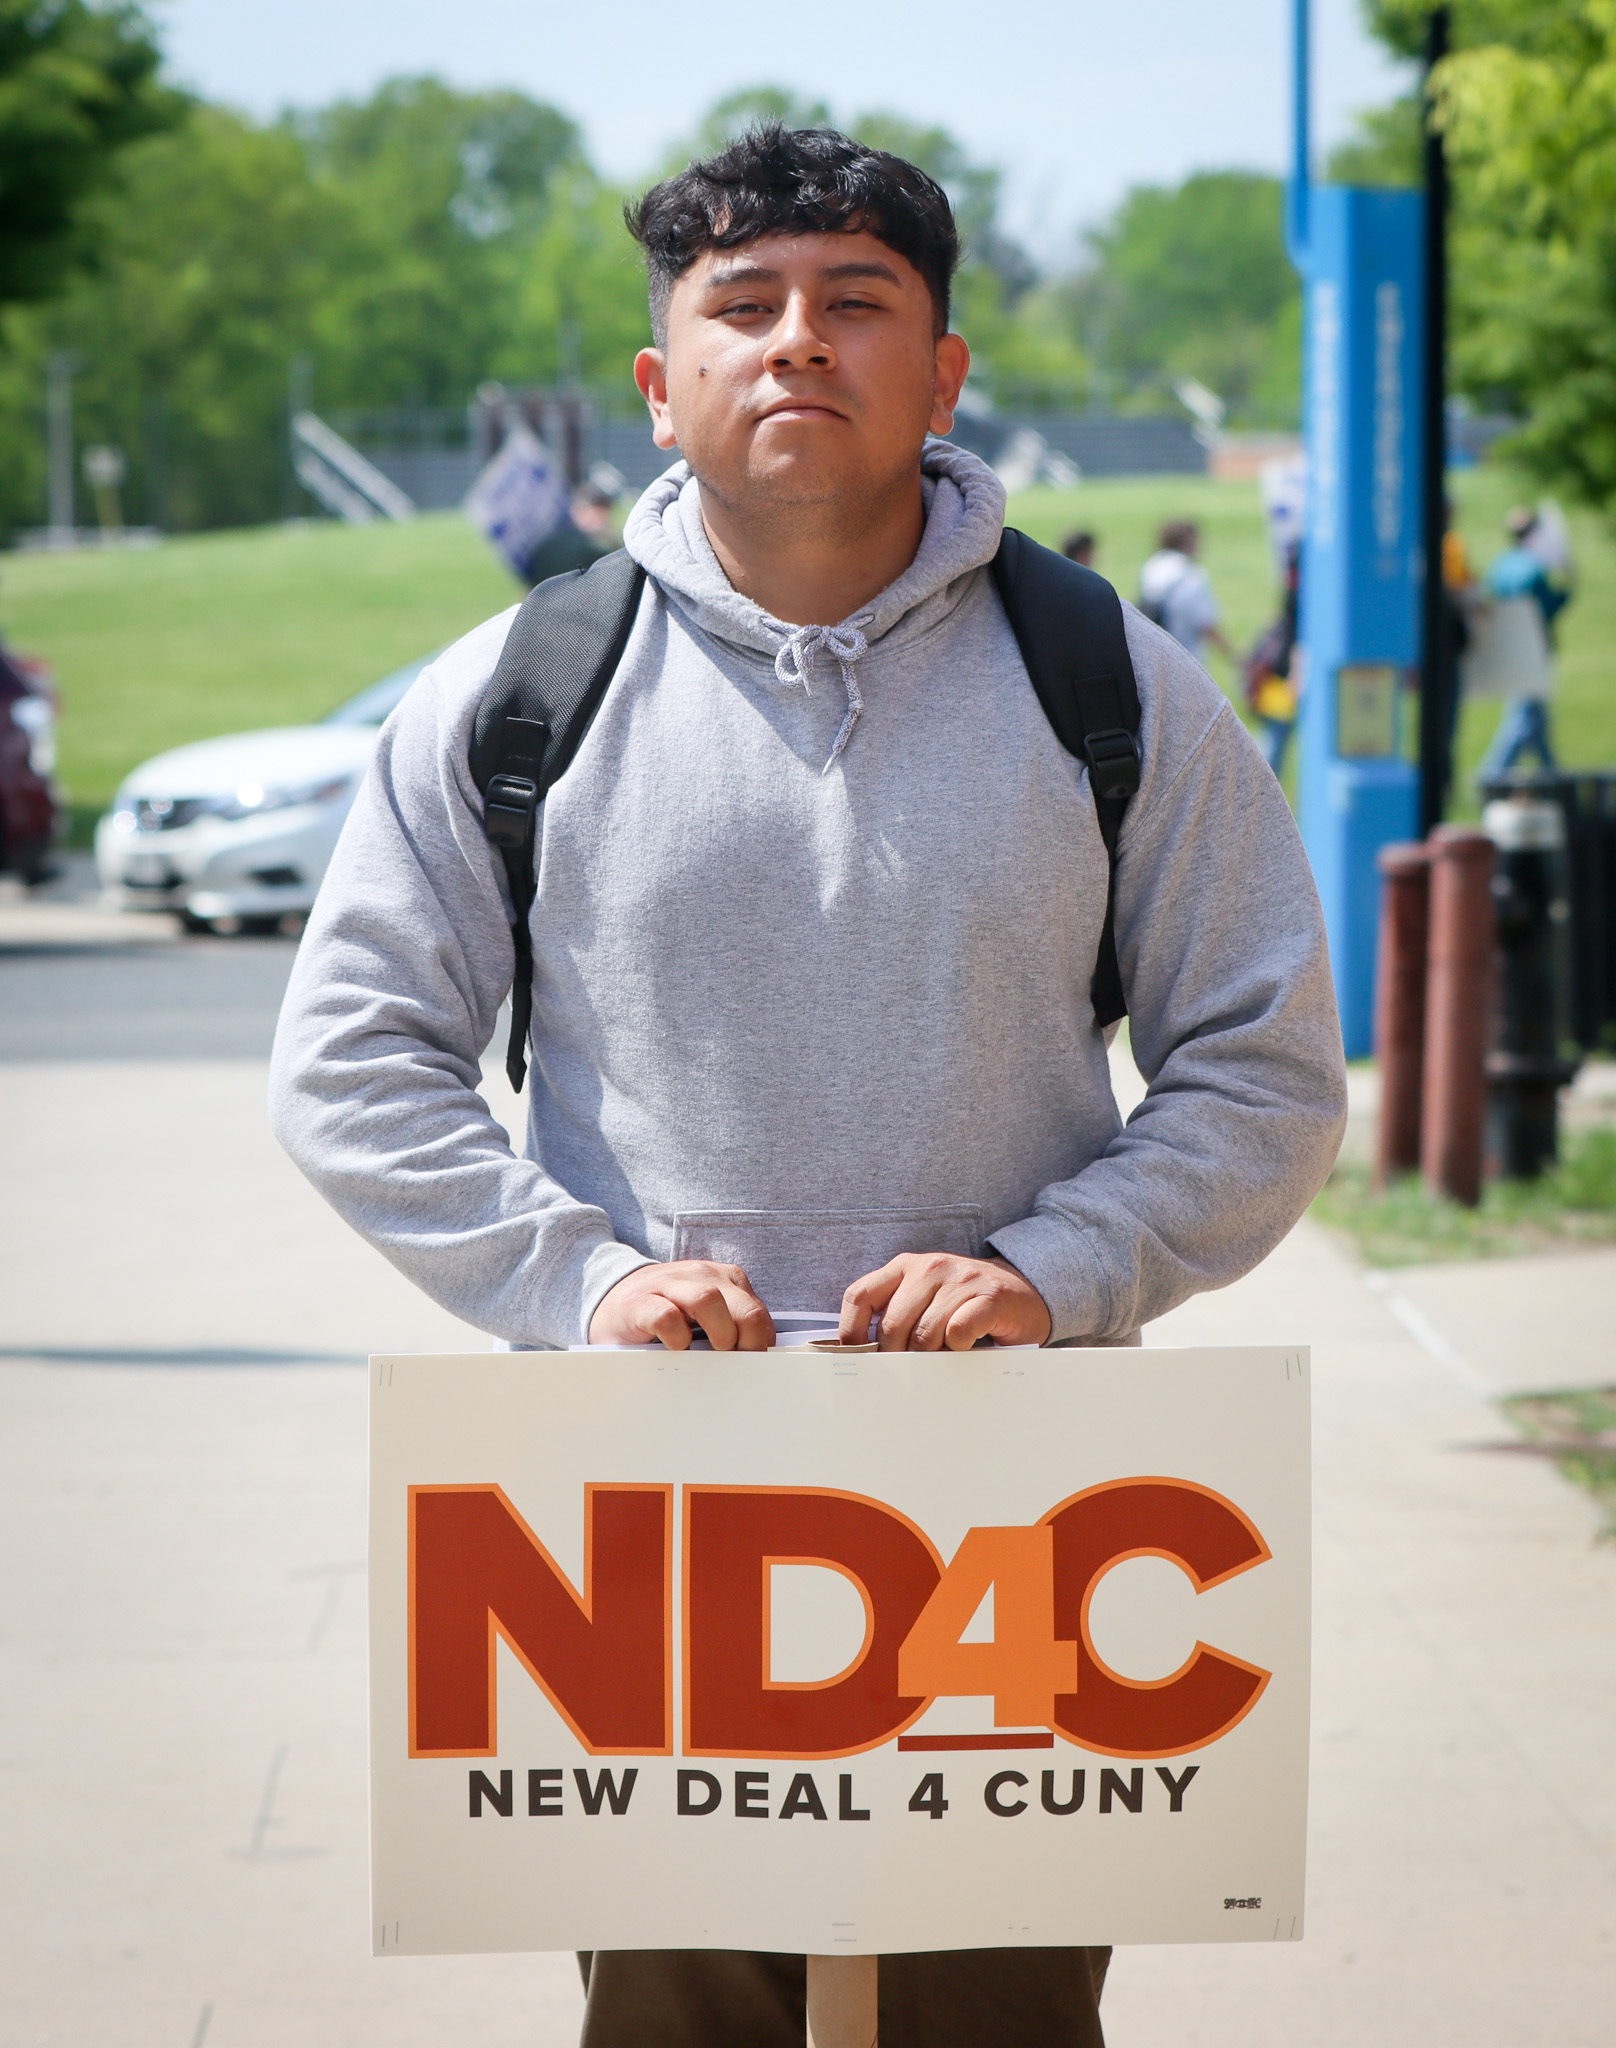 Edgar Rojas, a senior student at CSI, says he has seen the physical deterioration of the College of Staten Island due to lack of funding in the CUNY system. (Staten Island Advance, Priya Shahi)